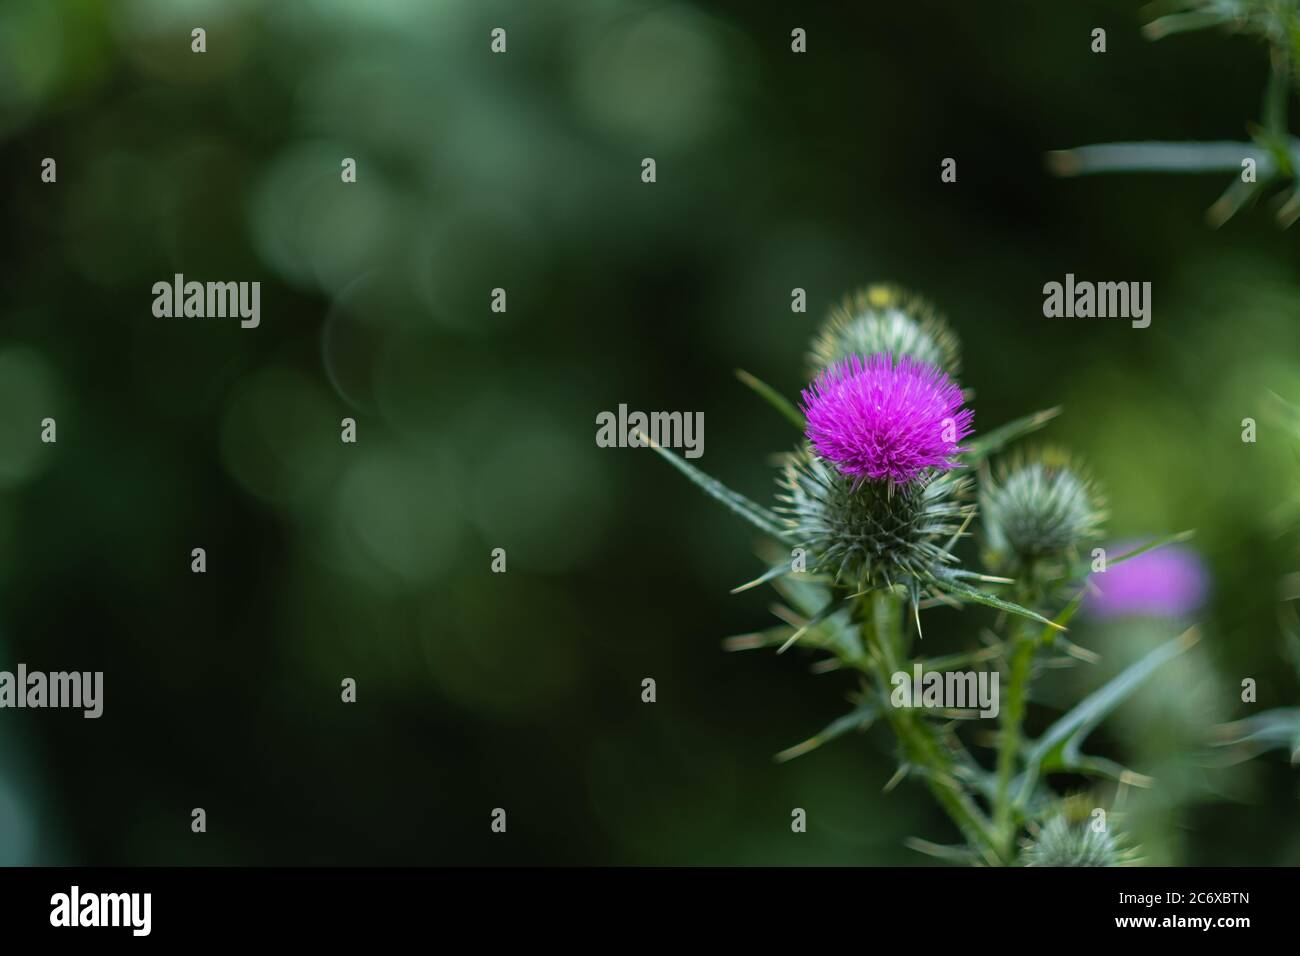 Purple thistle flower and leaves with thorns and green blurred background with a nice bokeh. Close up image with a large copy space. Stock Photo